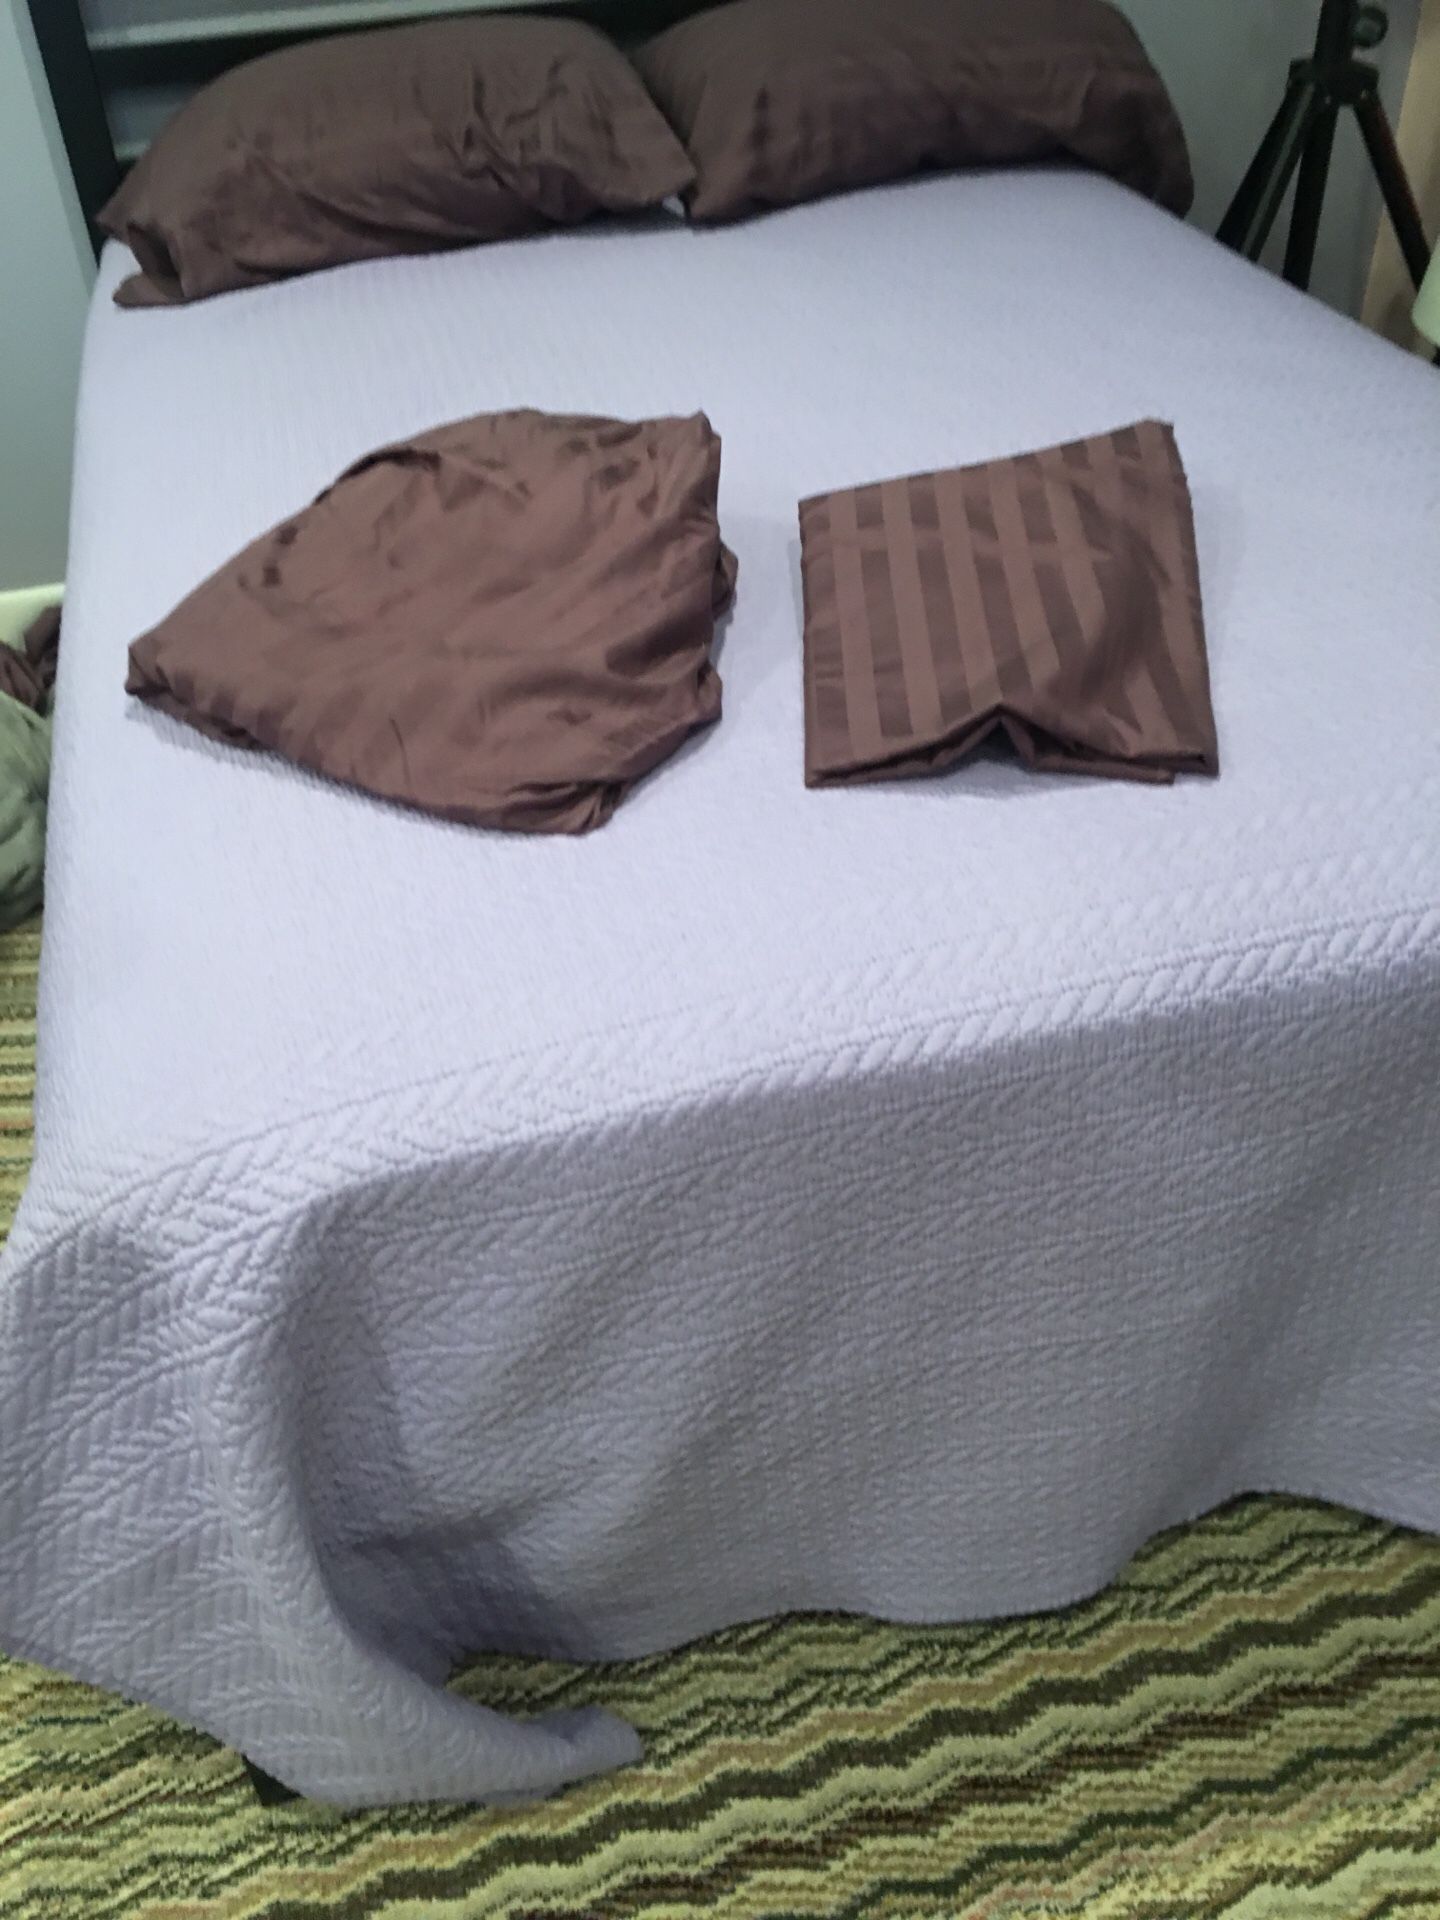 Full purple bedspread set of sheets and set a standard pillowcases Have 2 sets